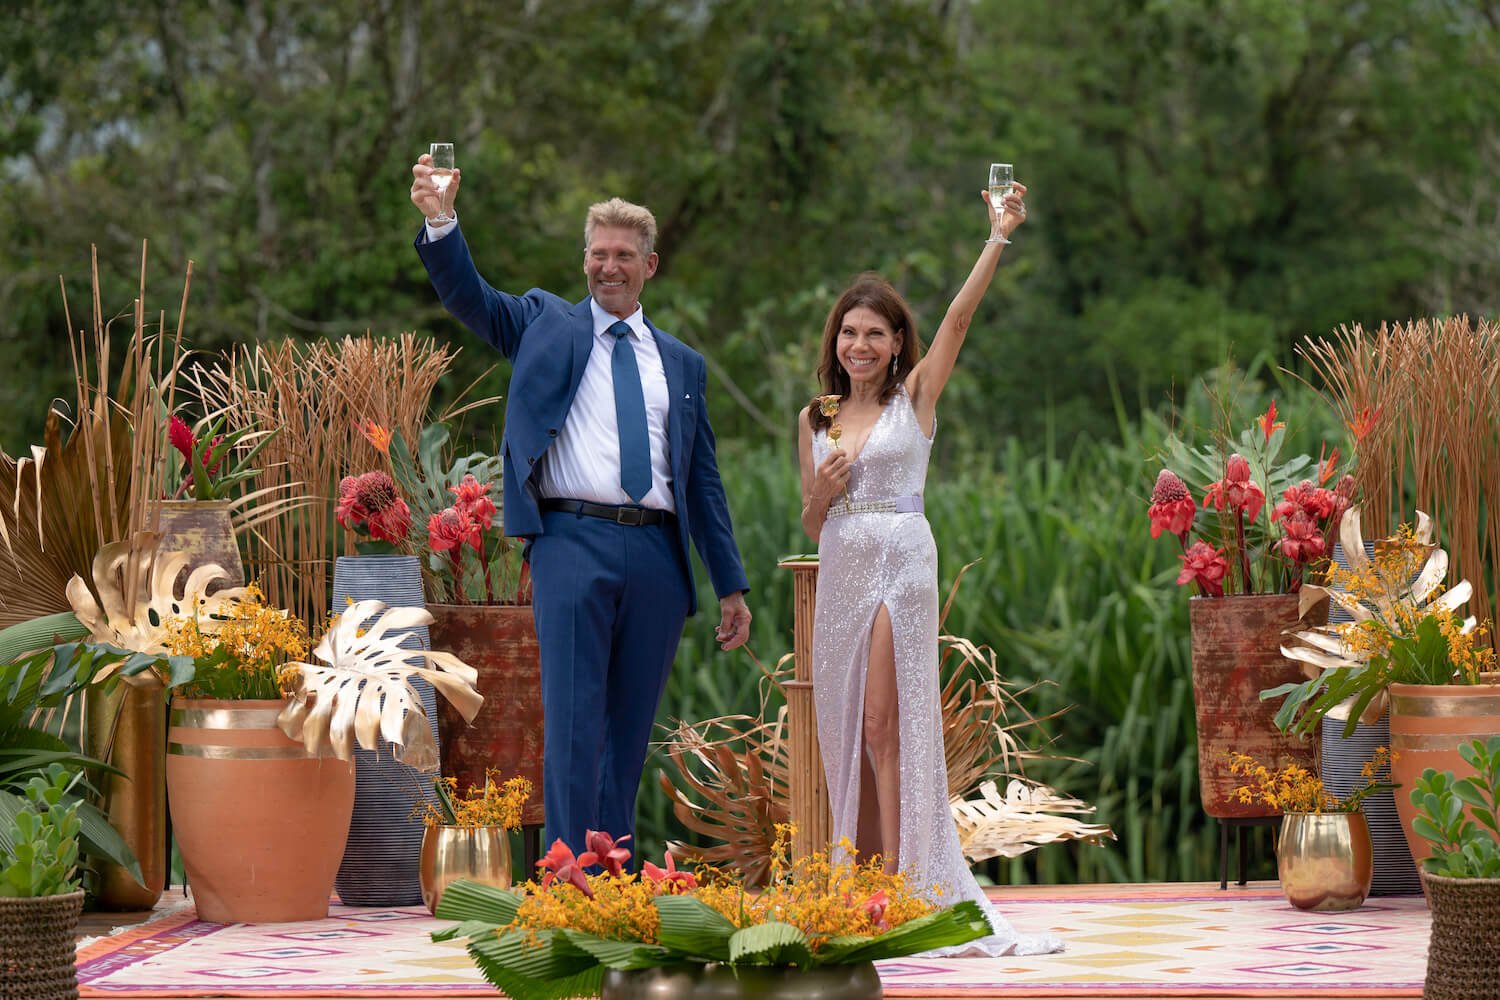 Gerry Turner and Theresa Nist on 'The Golden Bachelor' finale holding up champagne to toast